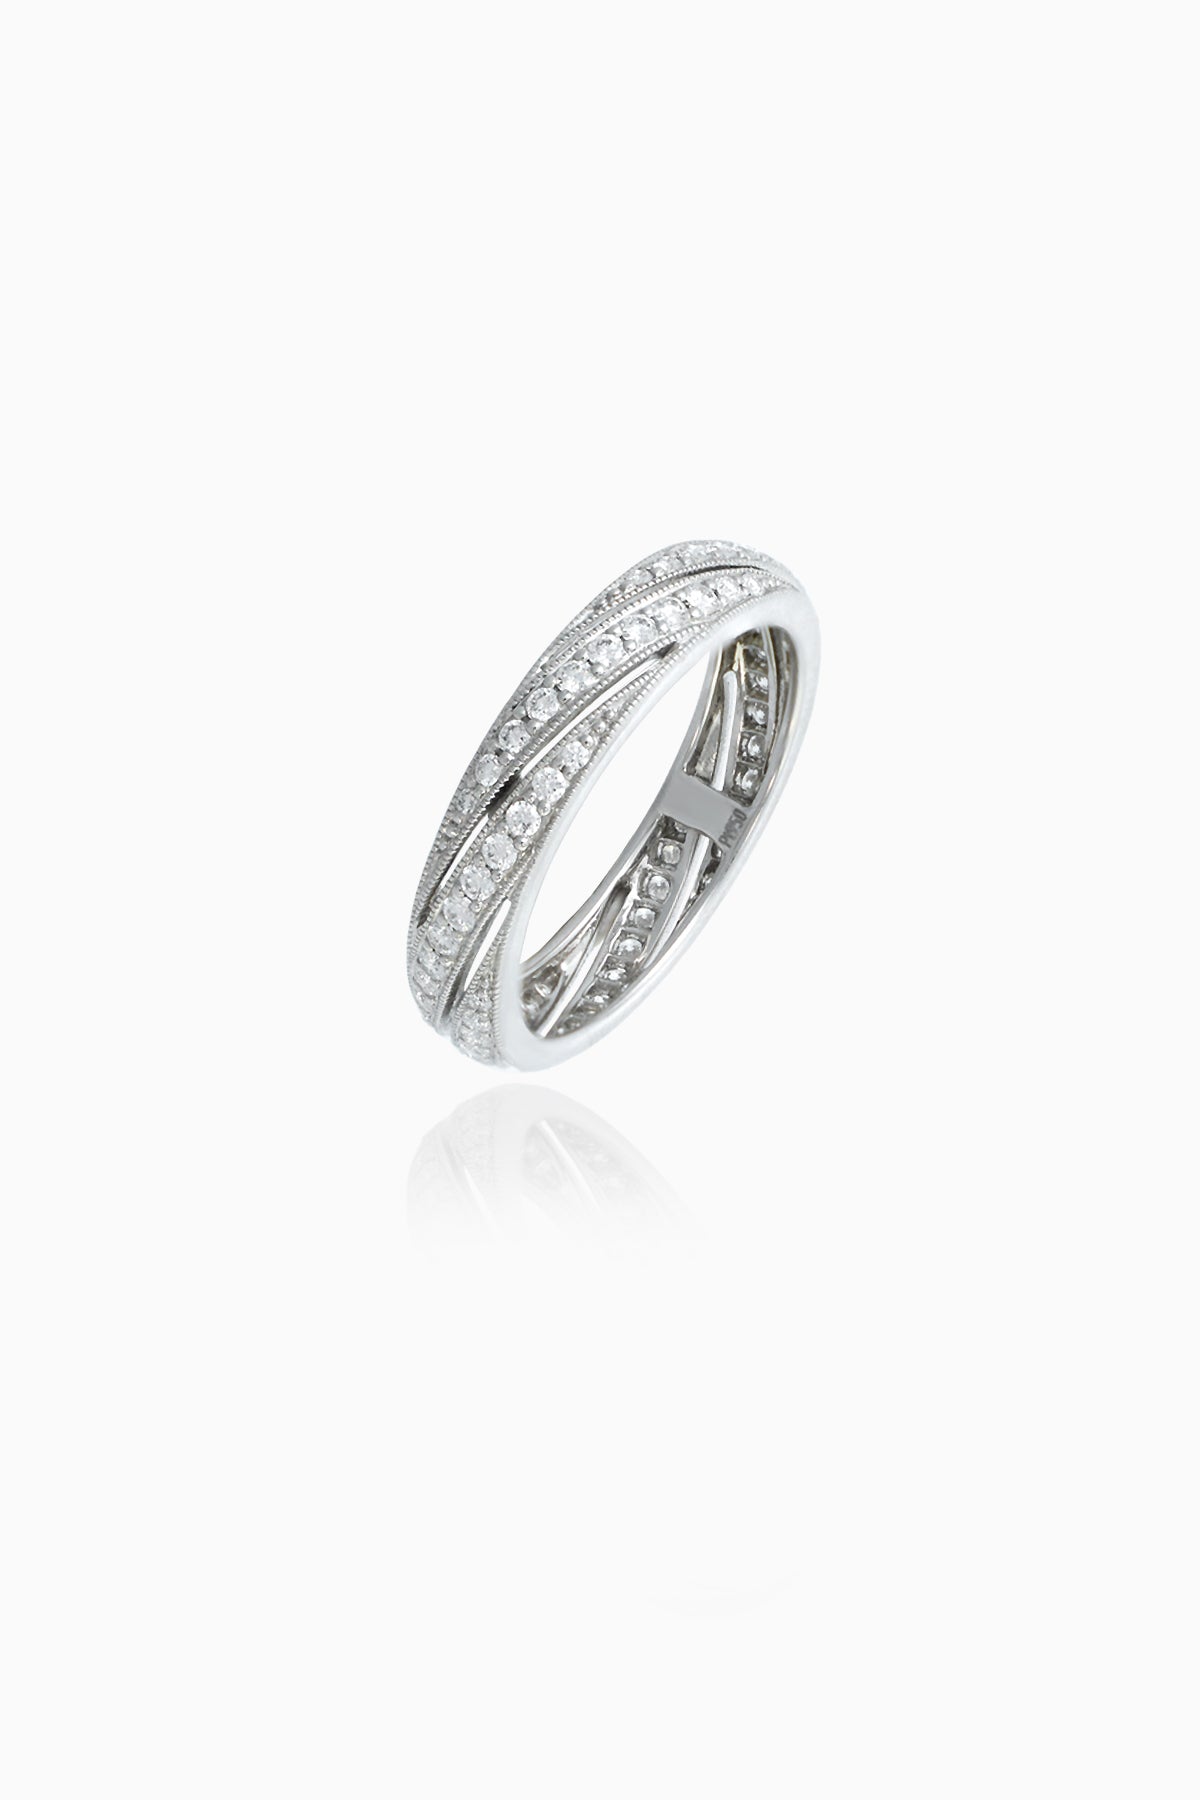 Ray of Light Band in Platinum